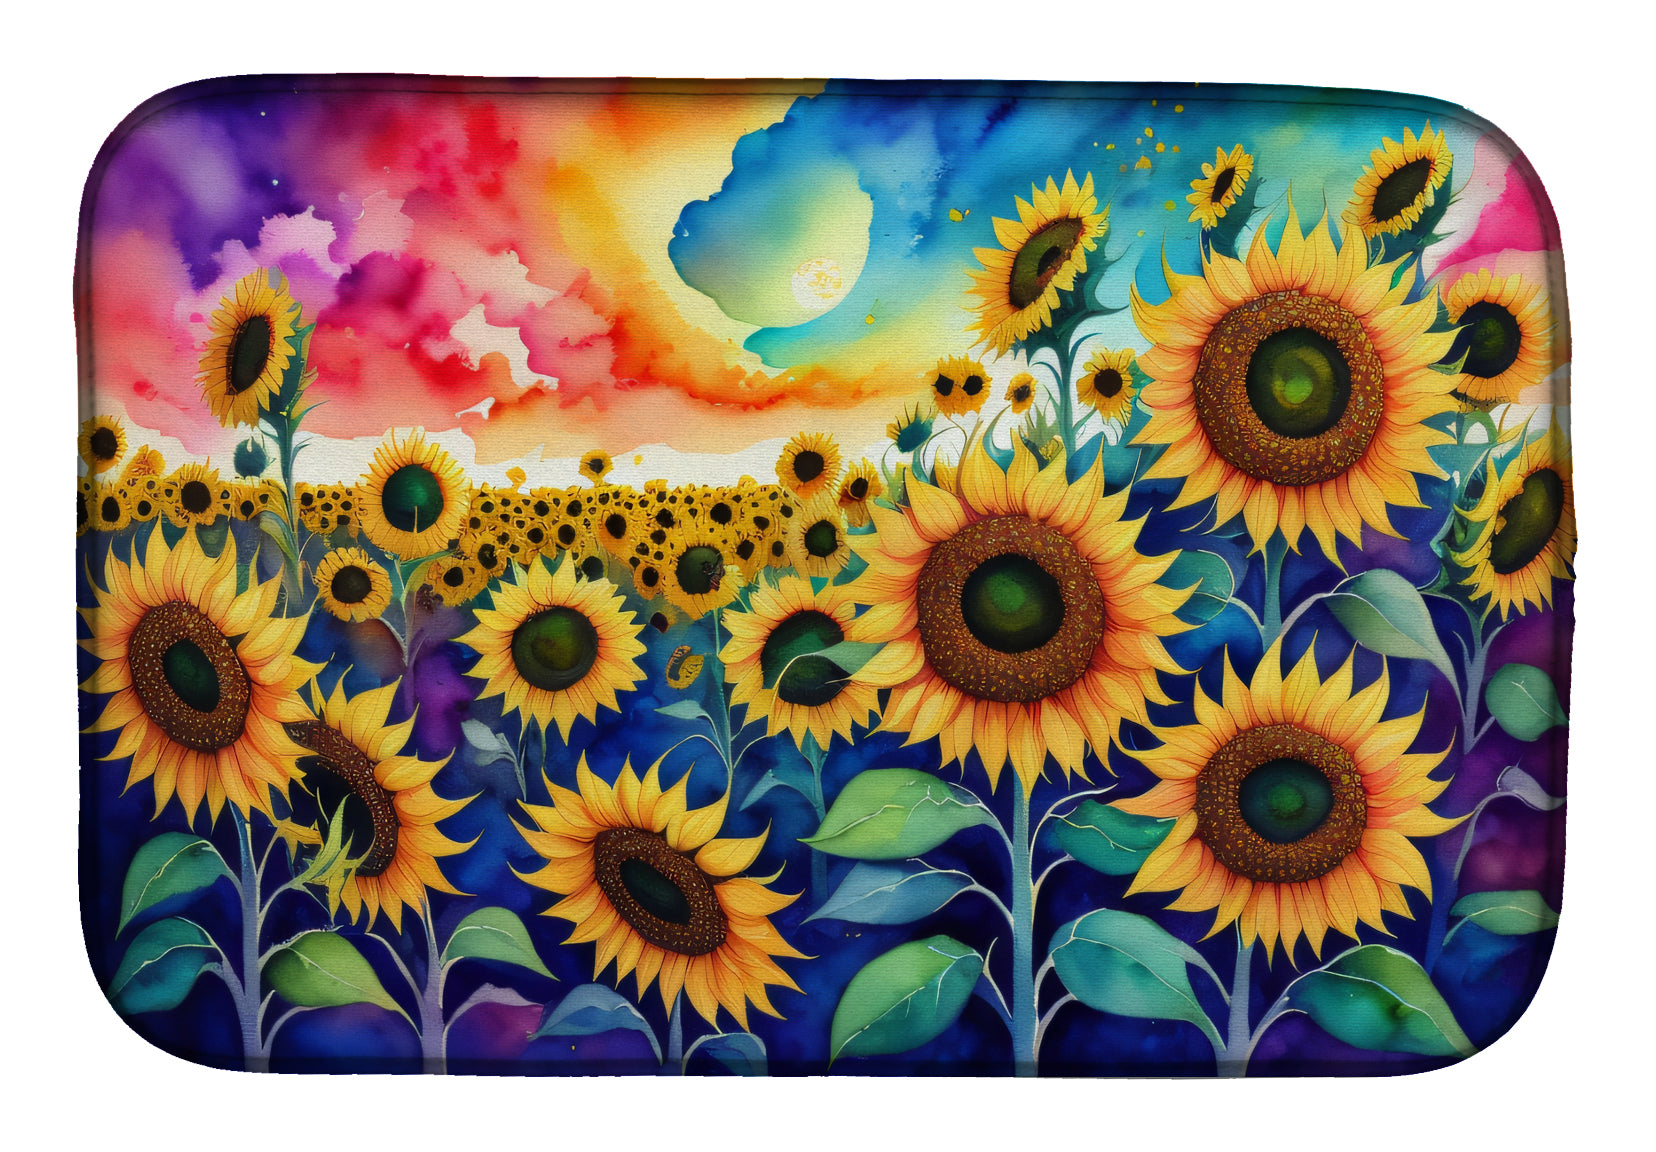 Buy this Sunflowers in Color Dish Drying Mat